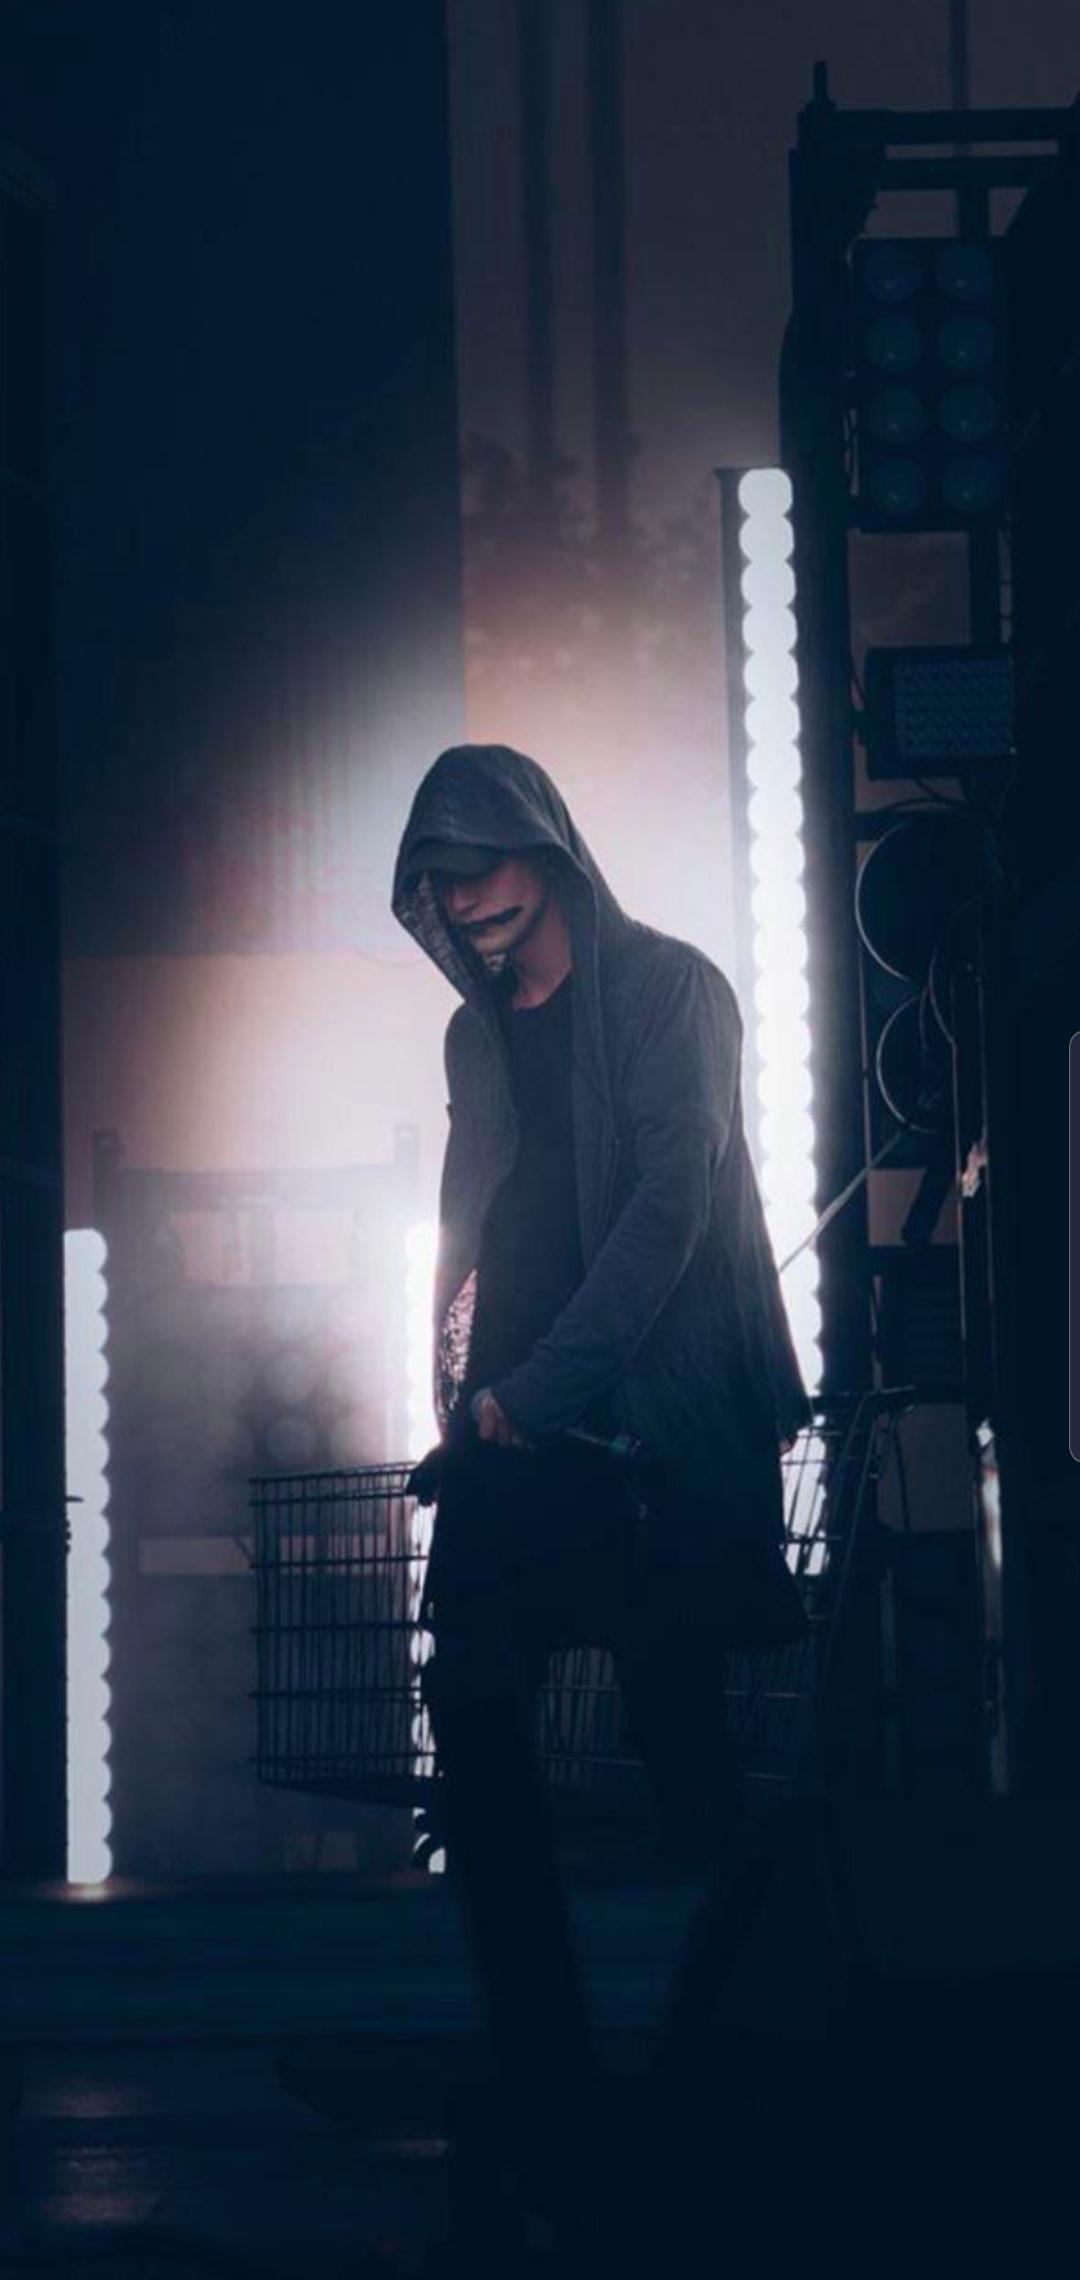 NF wallpaper if anyone is looking for one